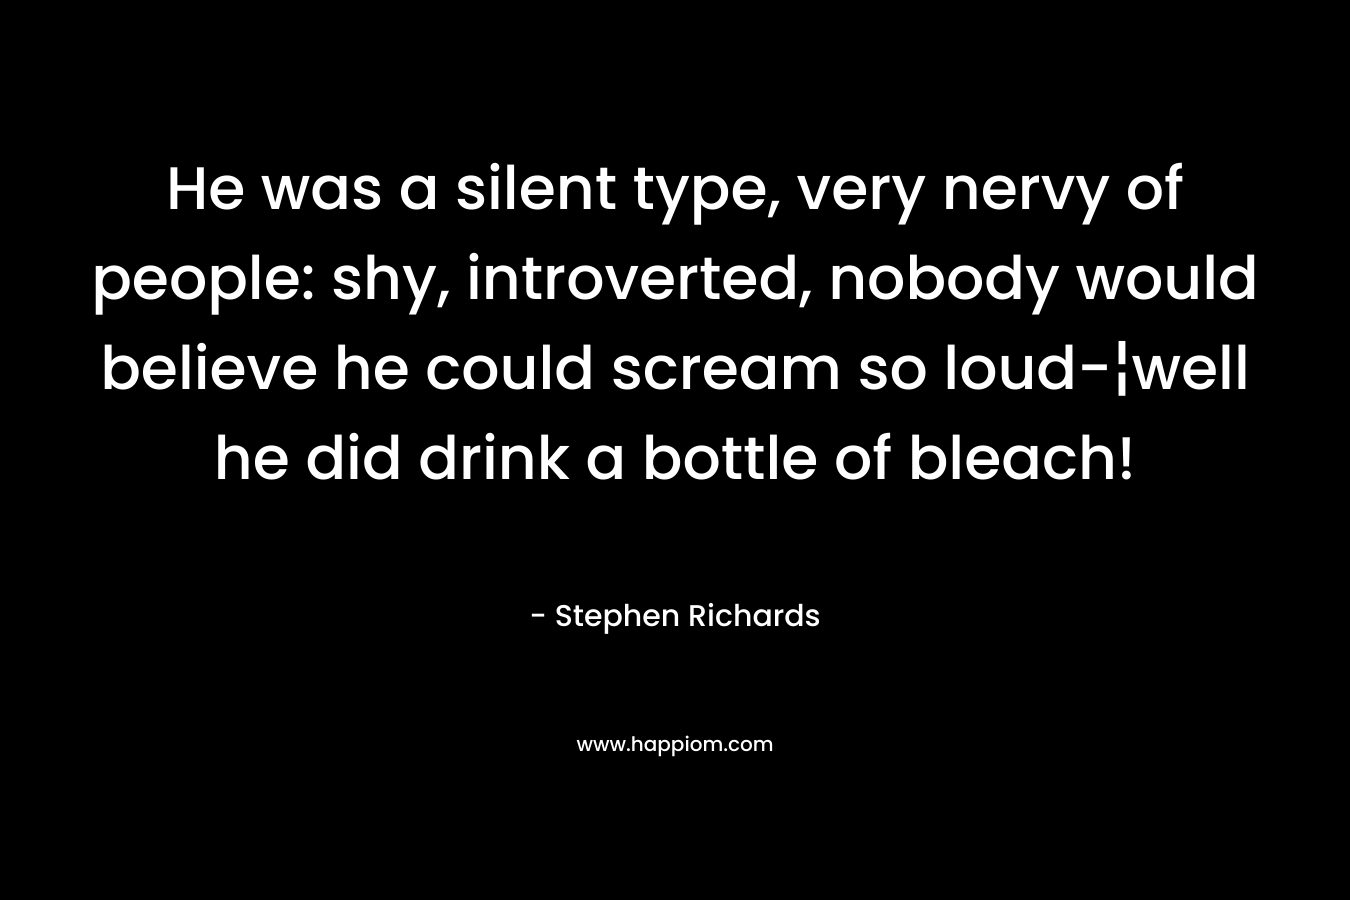 He was a silent type, very nervy of people: shy, introverted, nobody would believe he could scream so loud-¦well he did drink a bottle of bleach! – Stephen Richards